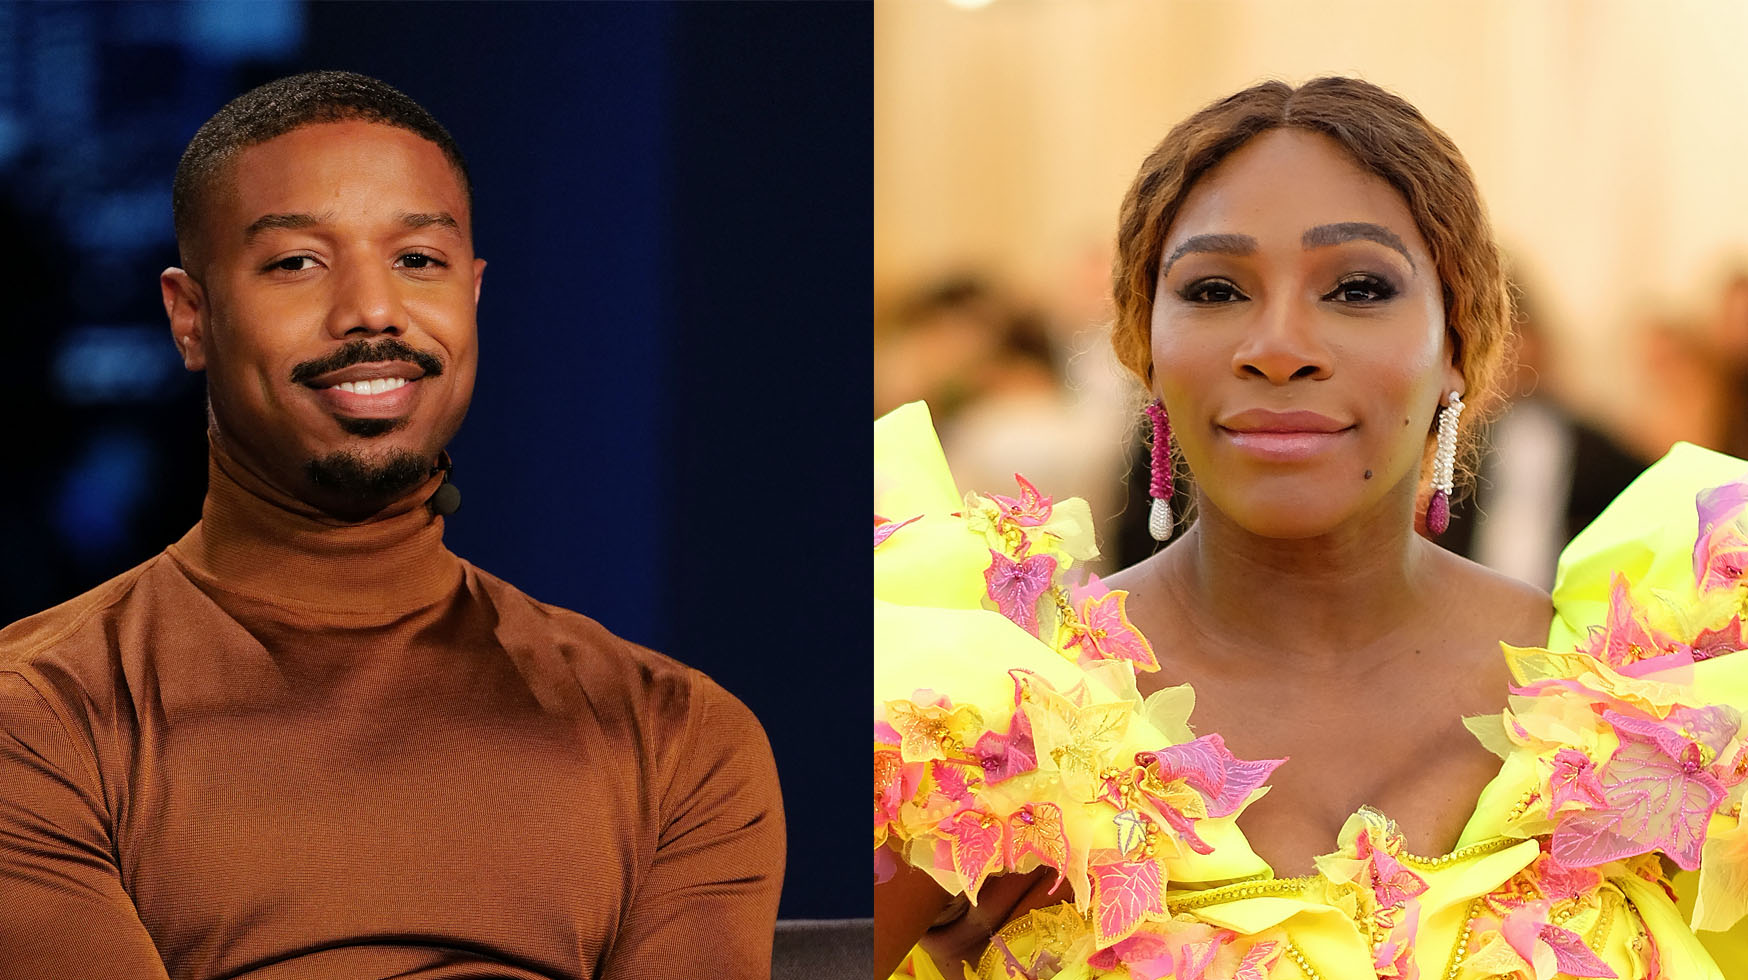 Serena Williams And Michael B. Jordan Partner To Give HBCU Students A Chance To Win $1 Million